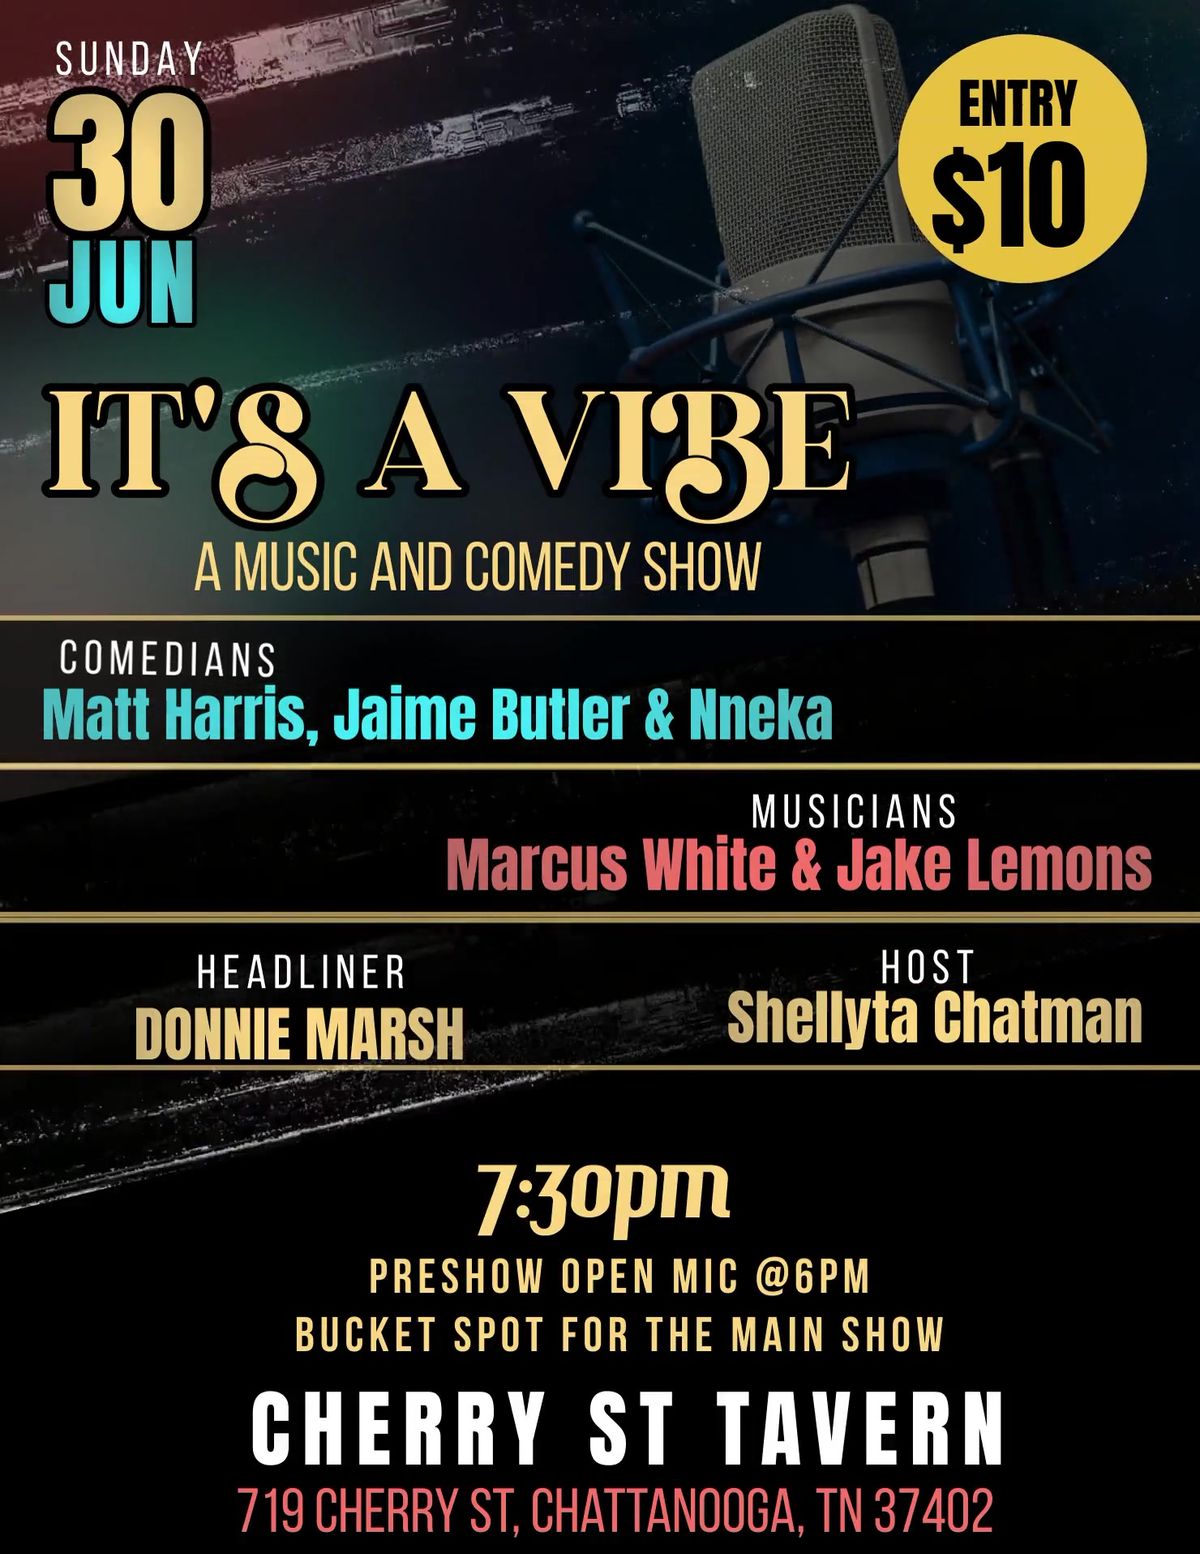 It's a Vibe - A music & comedy show